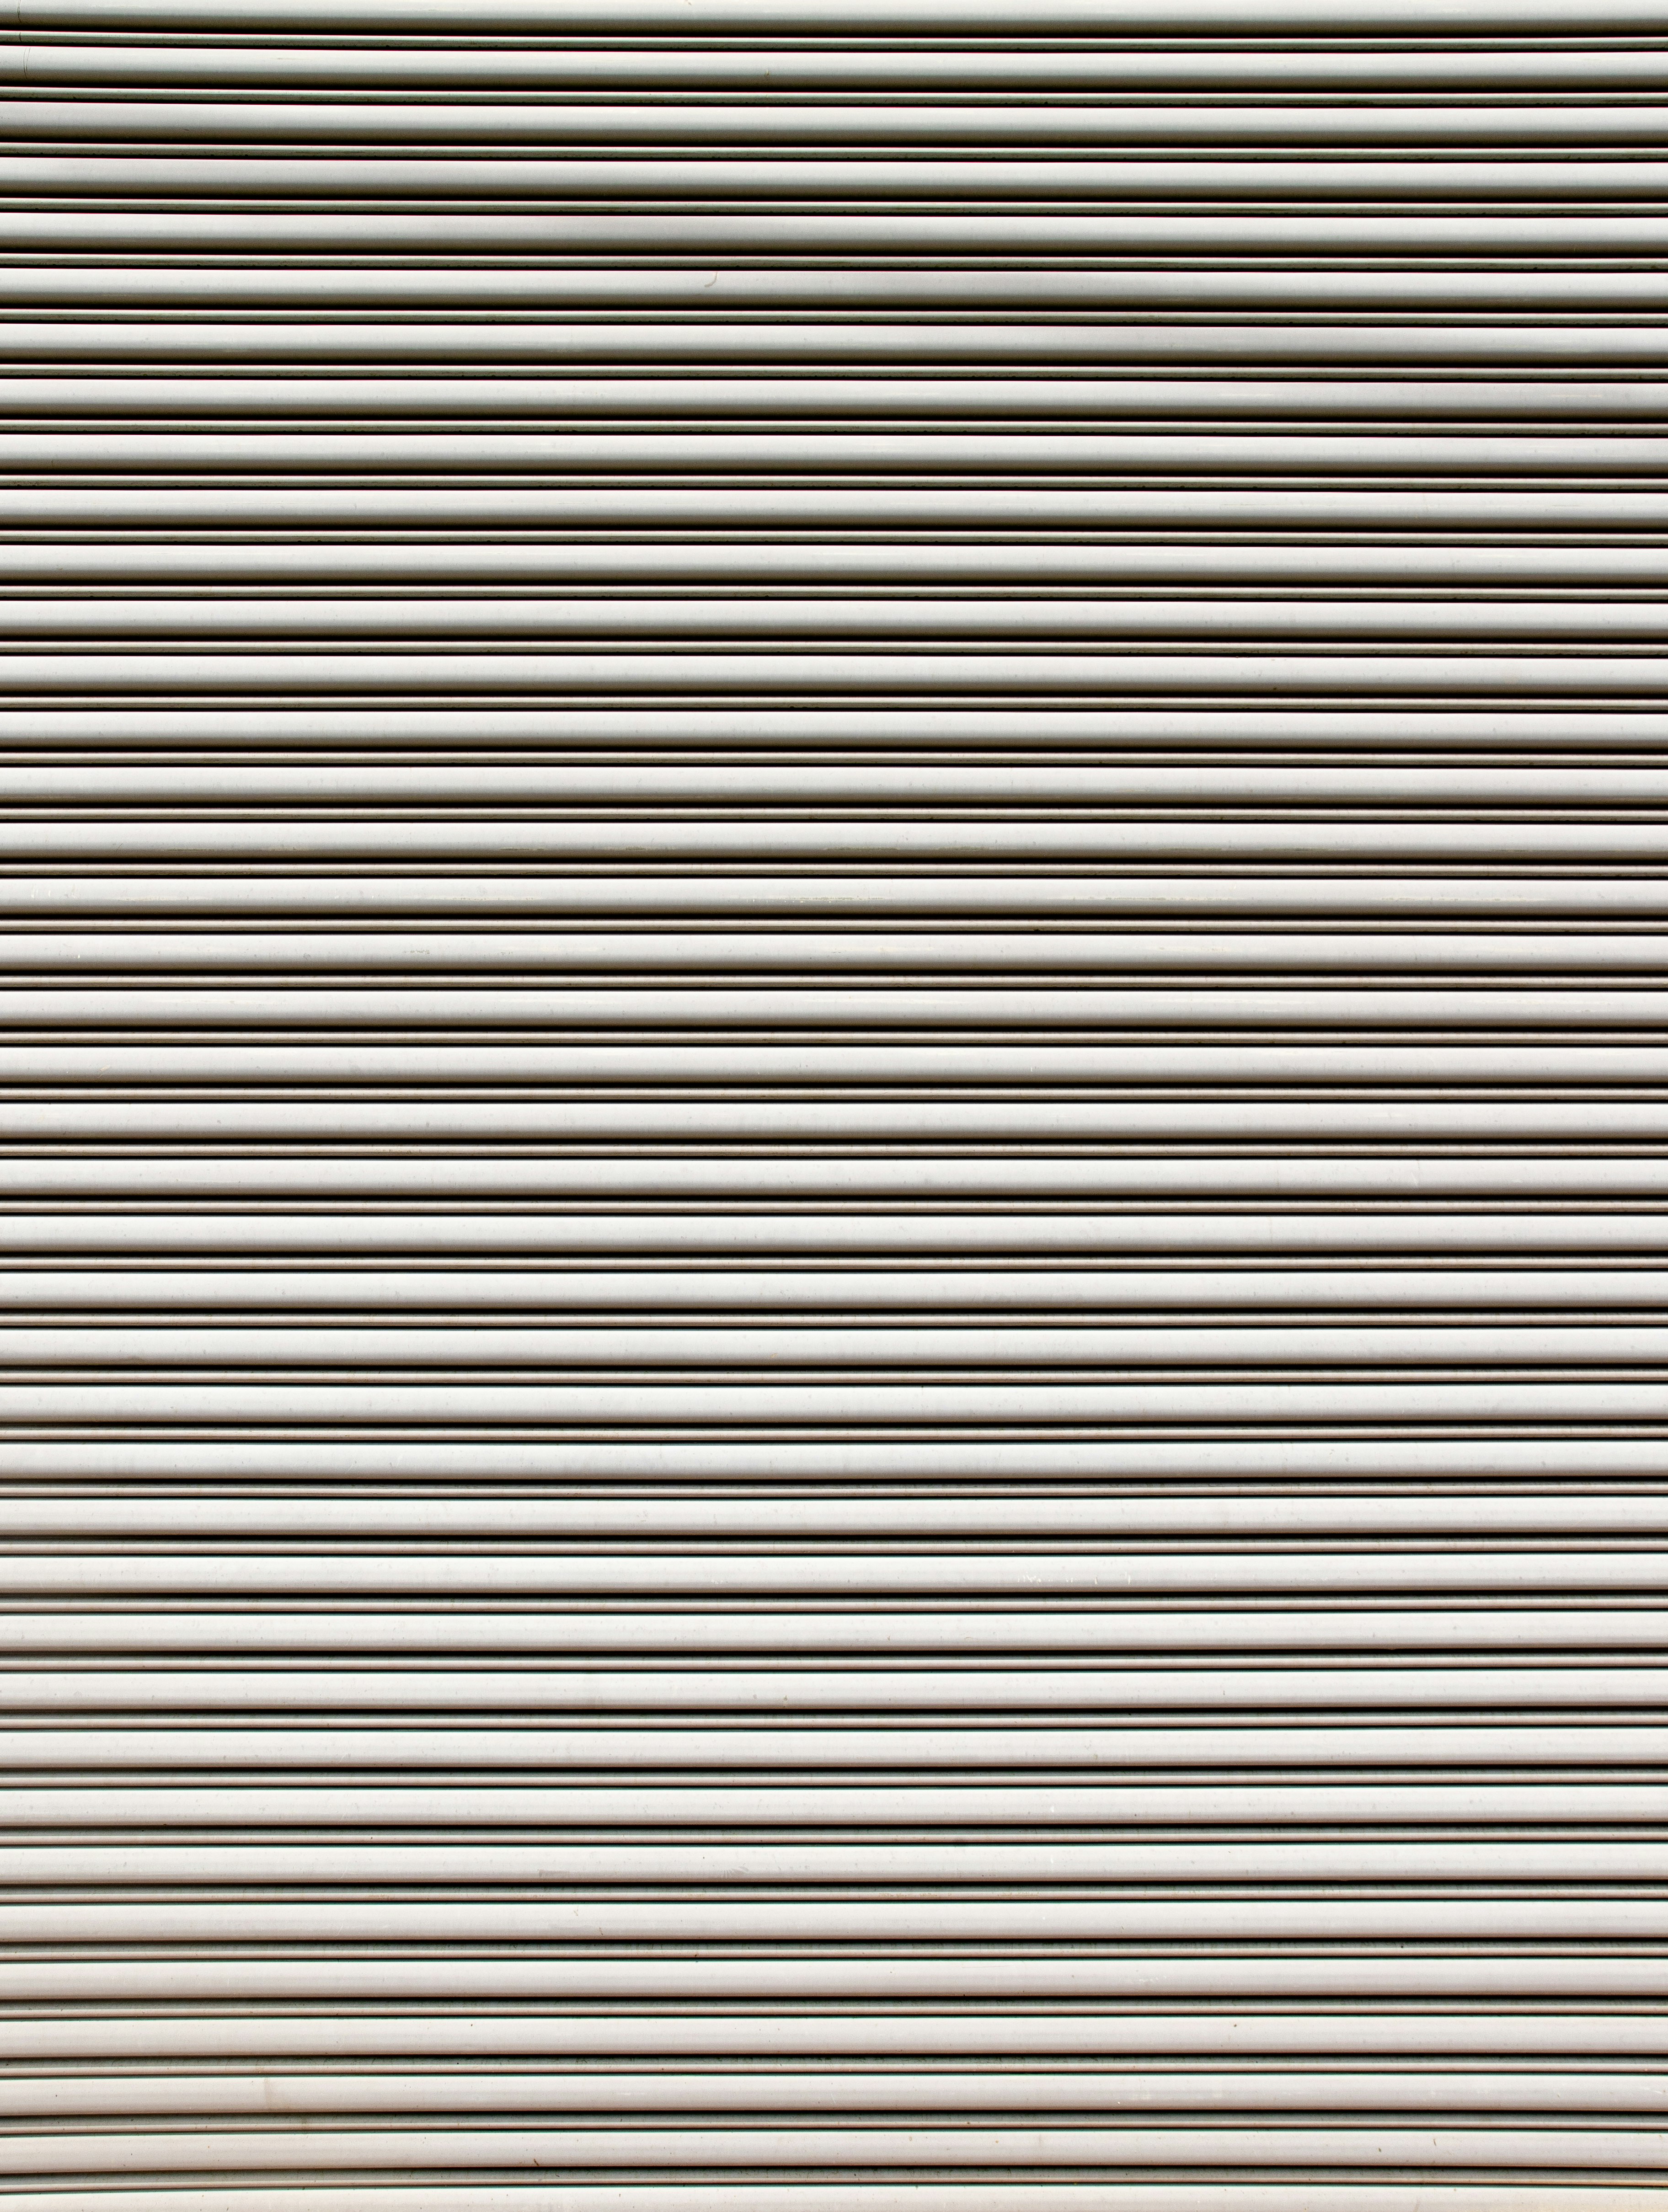 black and white striped pattern